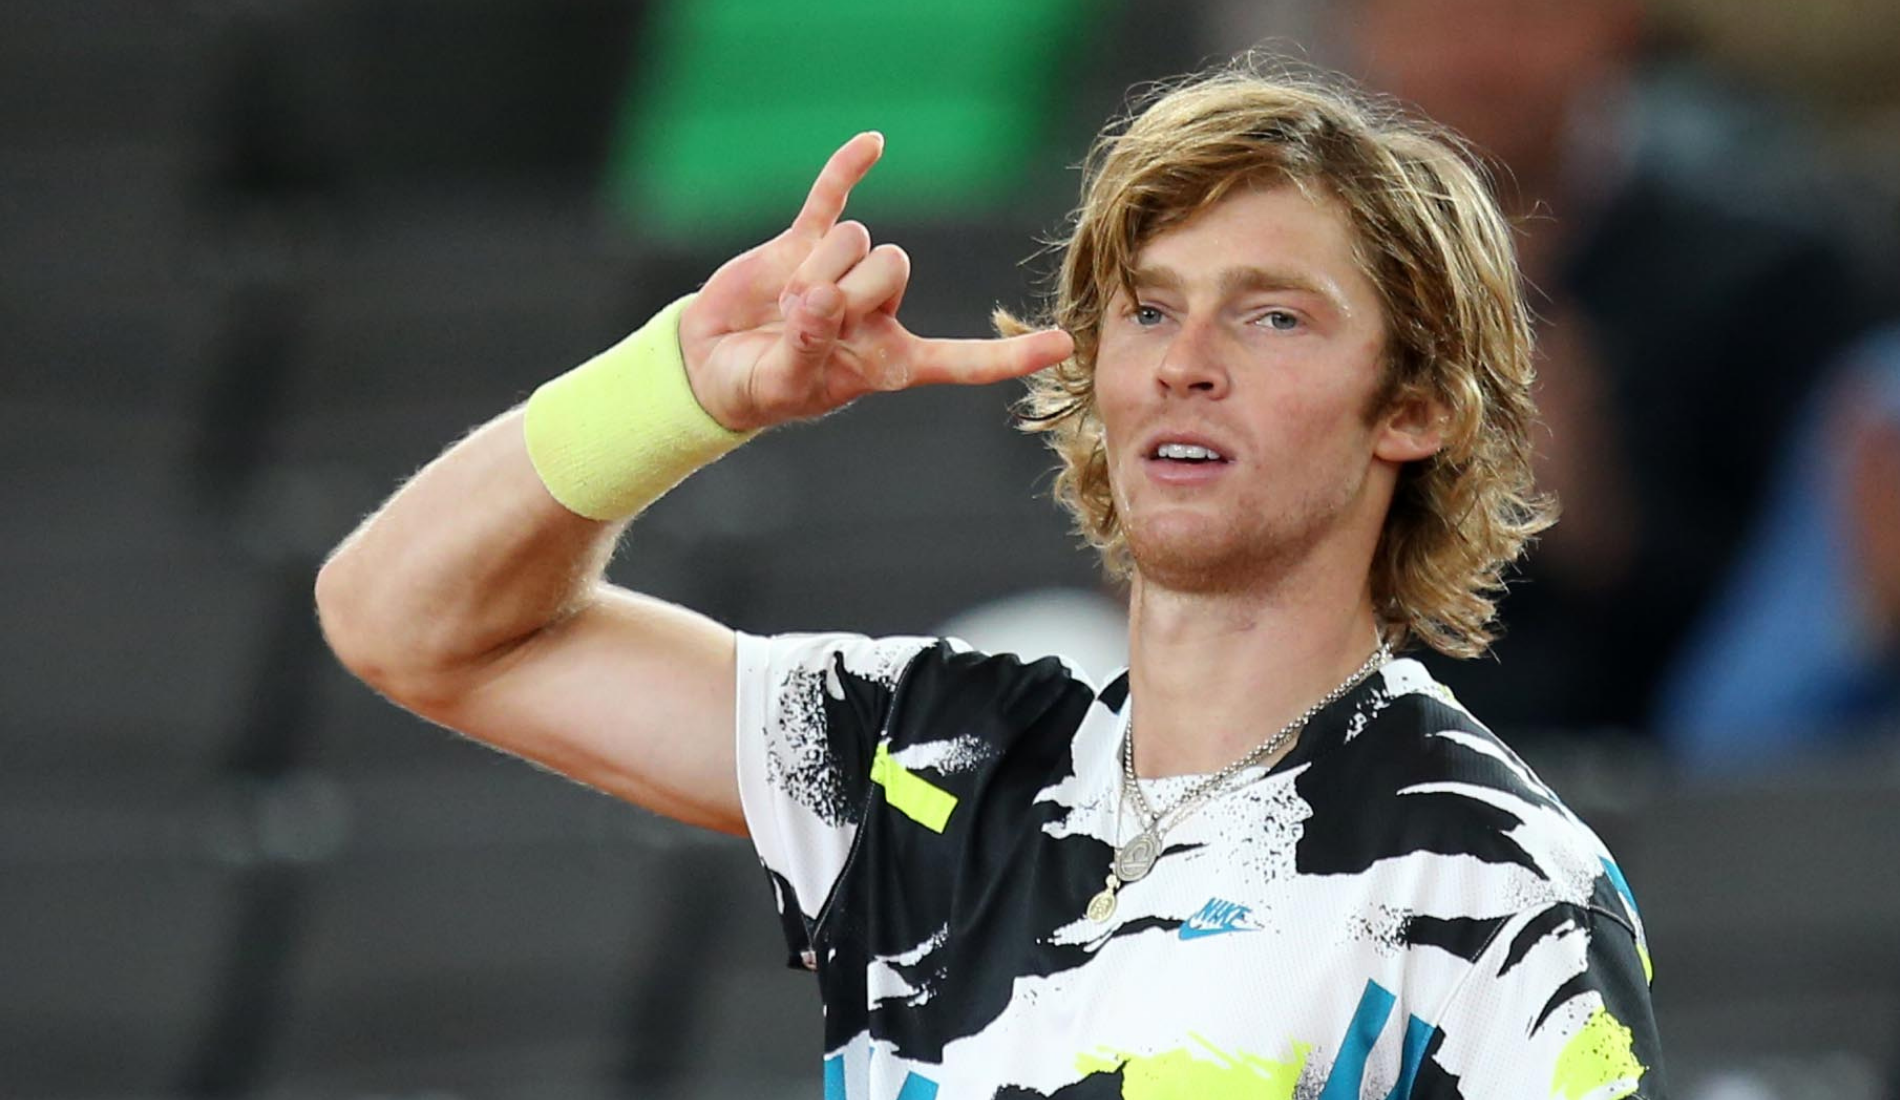 Andrey Rublev - Hambourg 2020